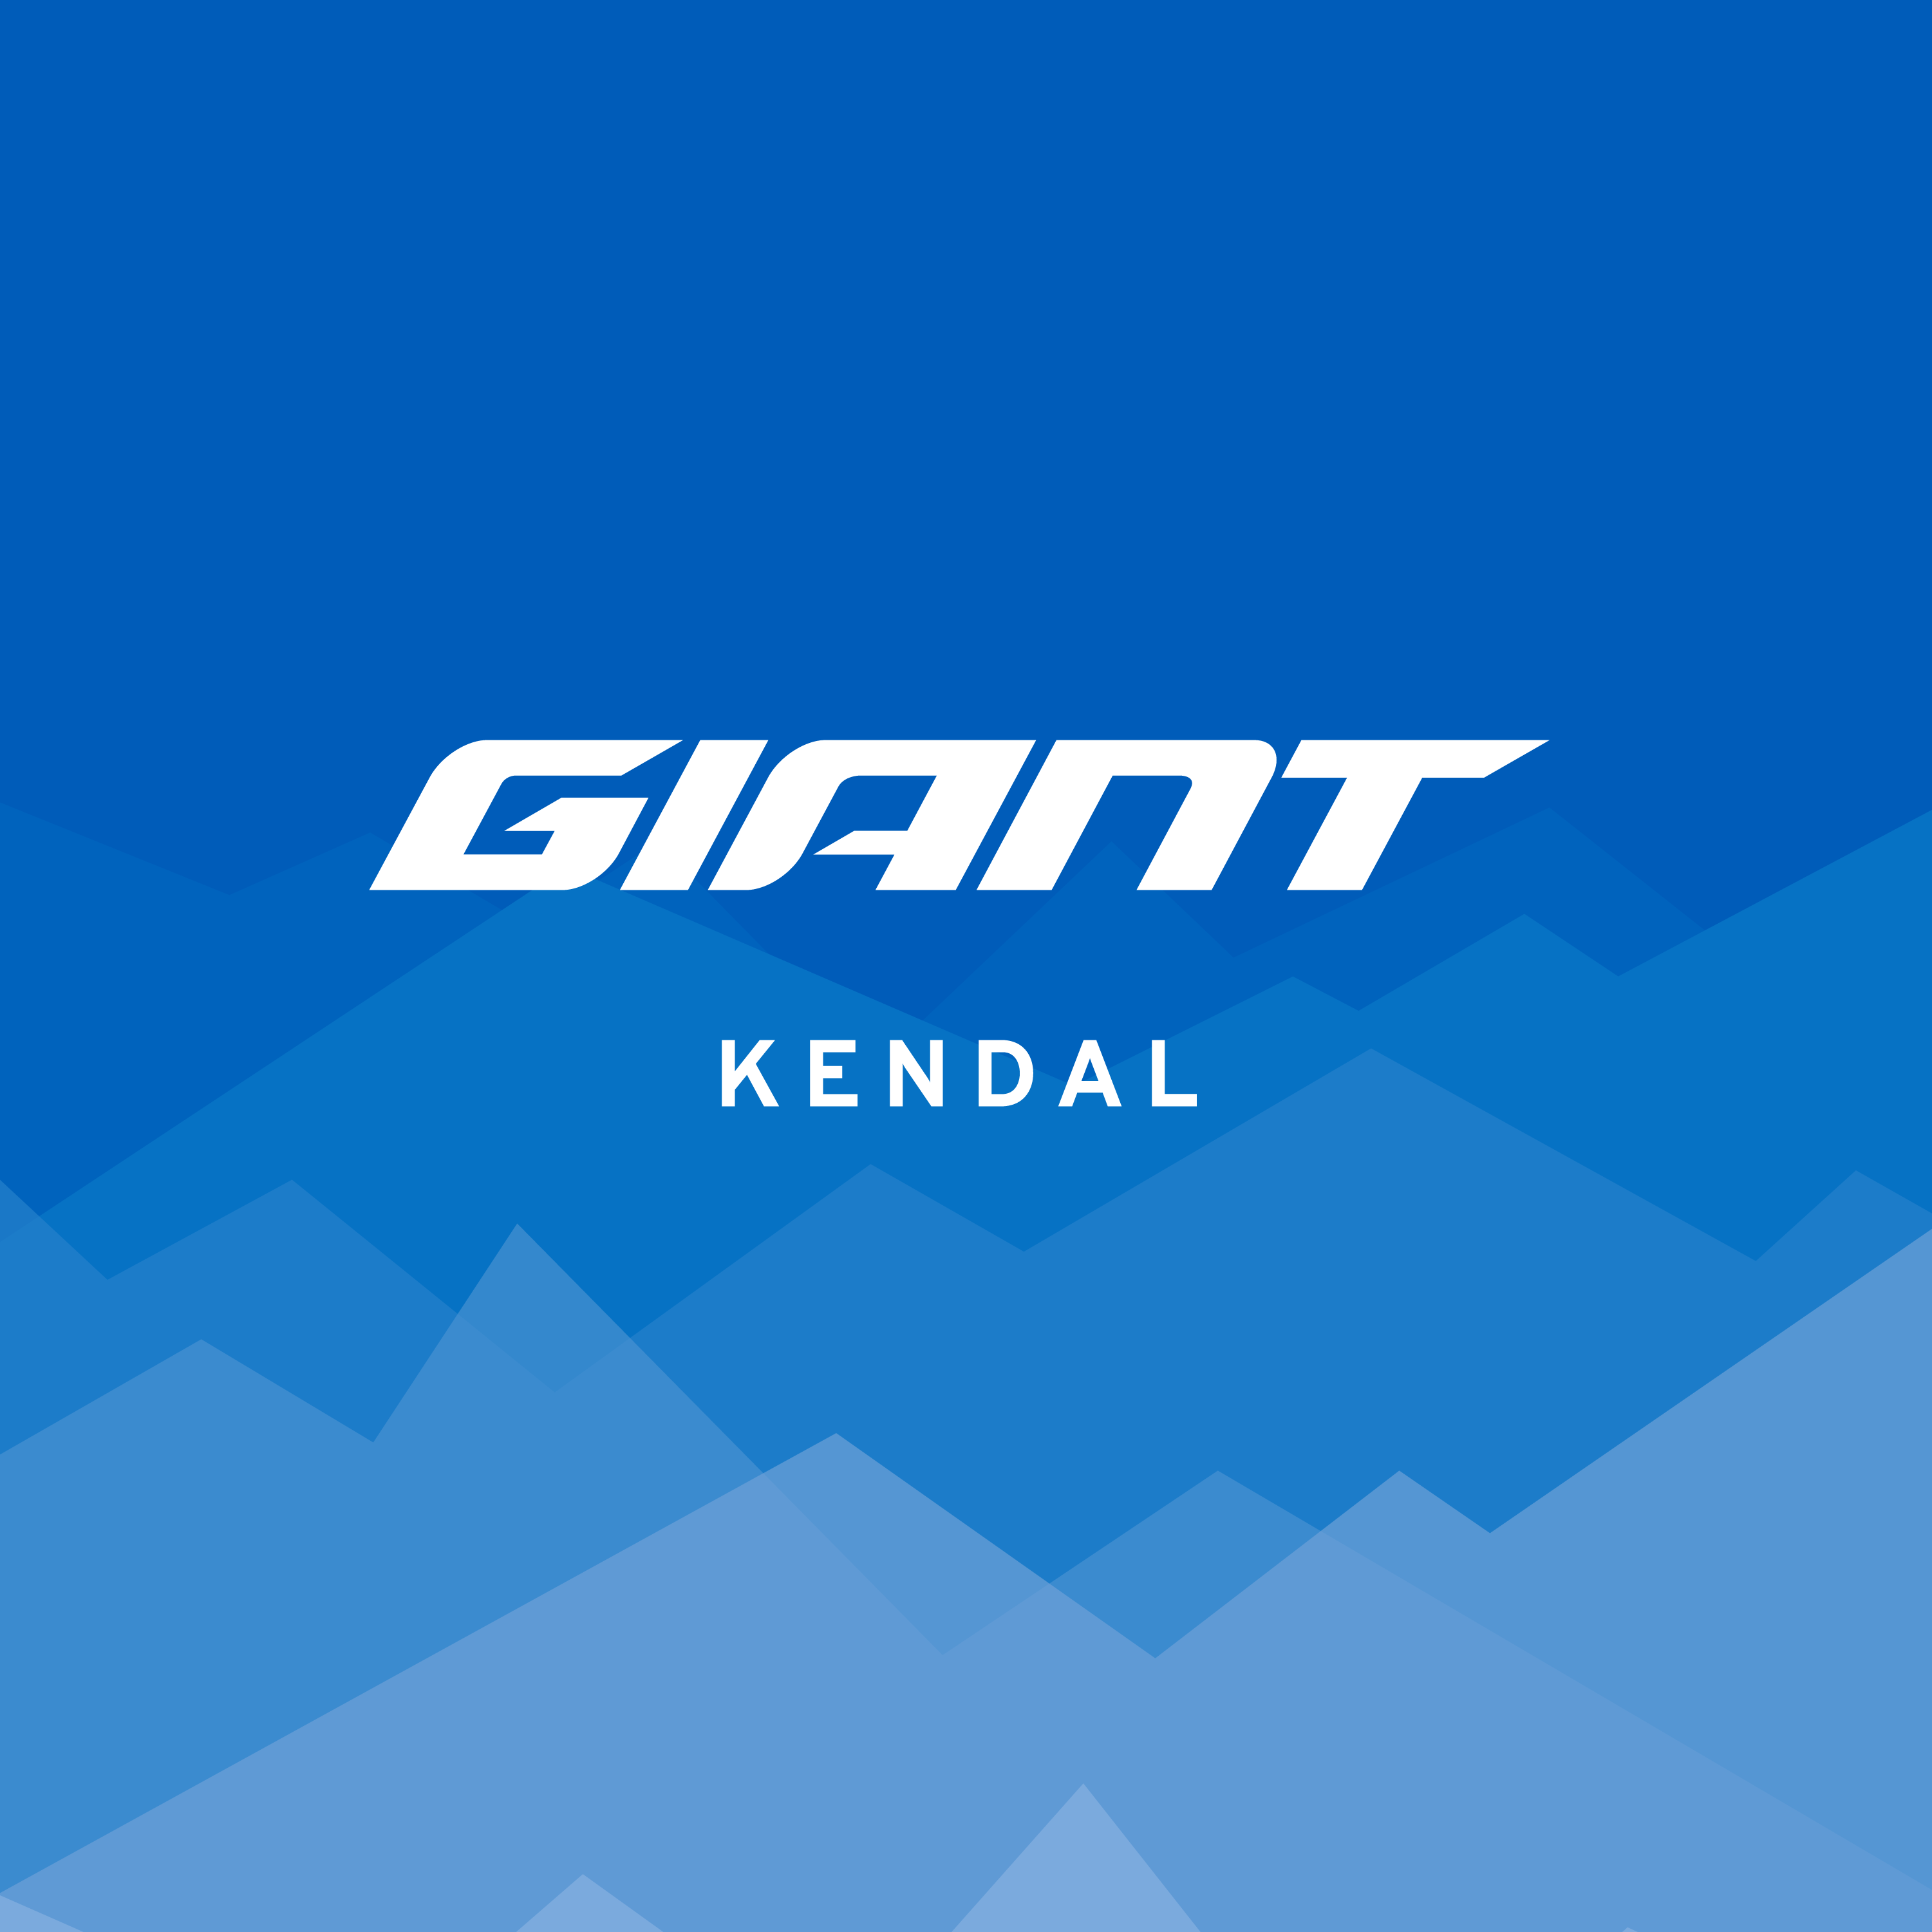 Club Image for GIANT KENDAL